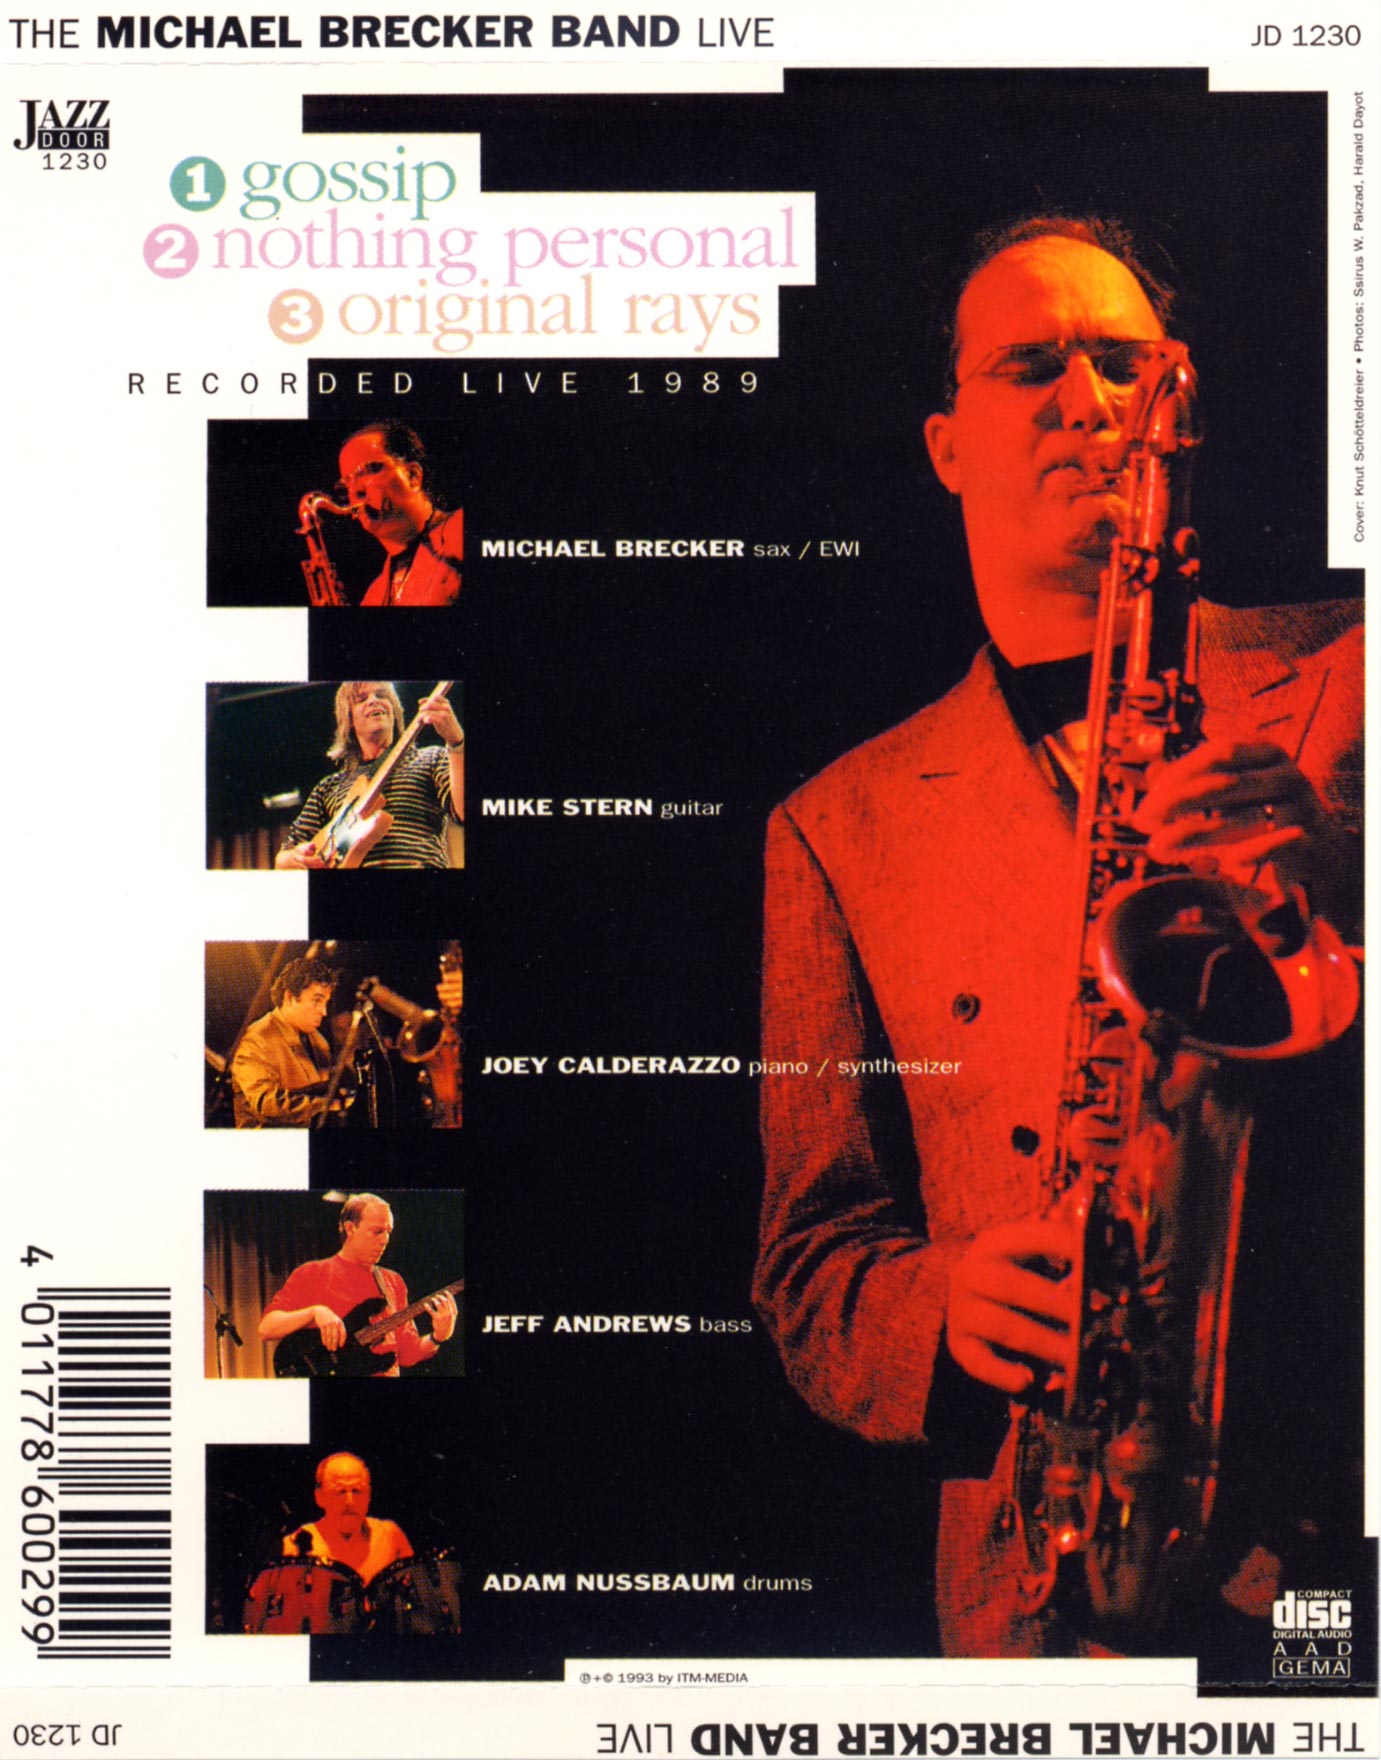 The Michael Brecker Band Live